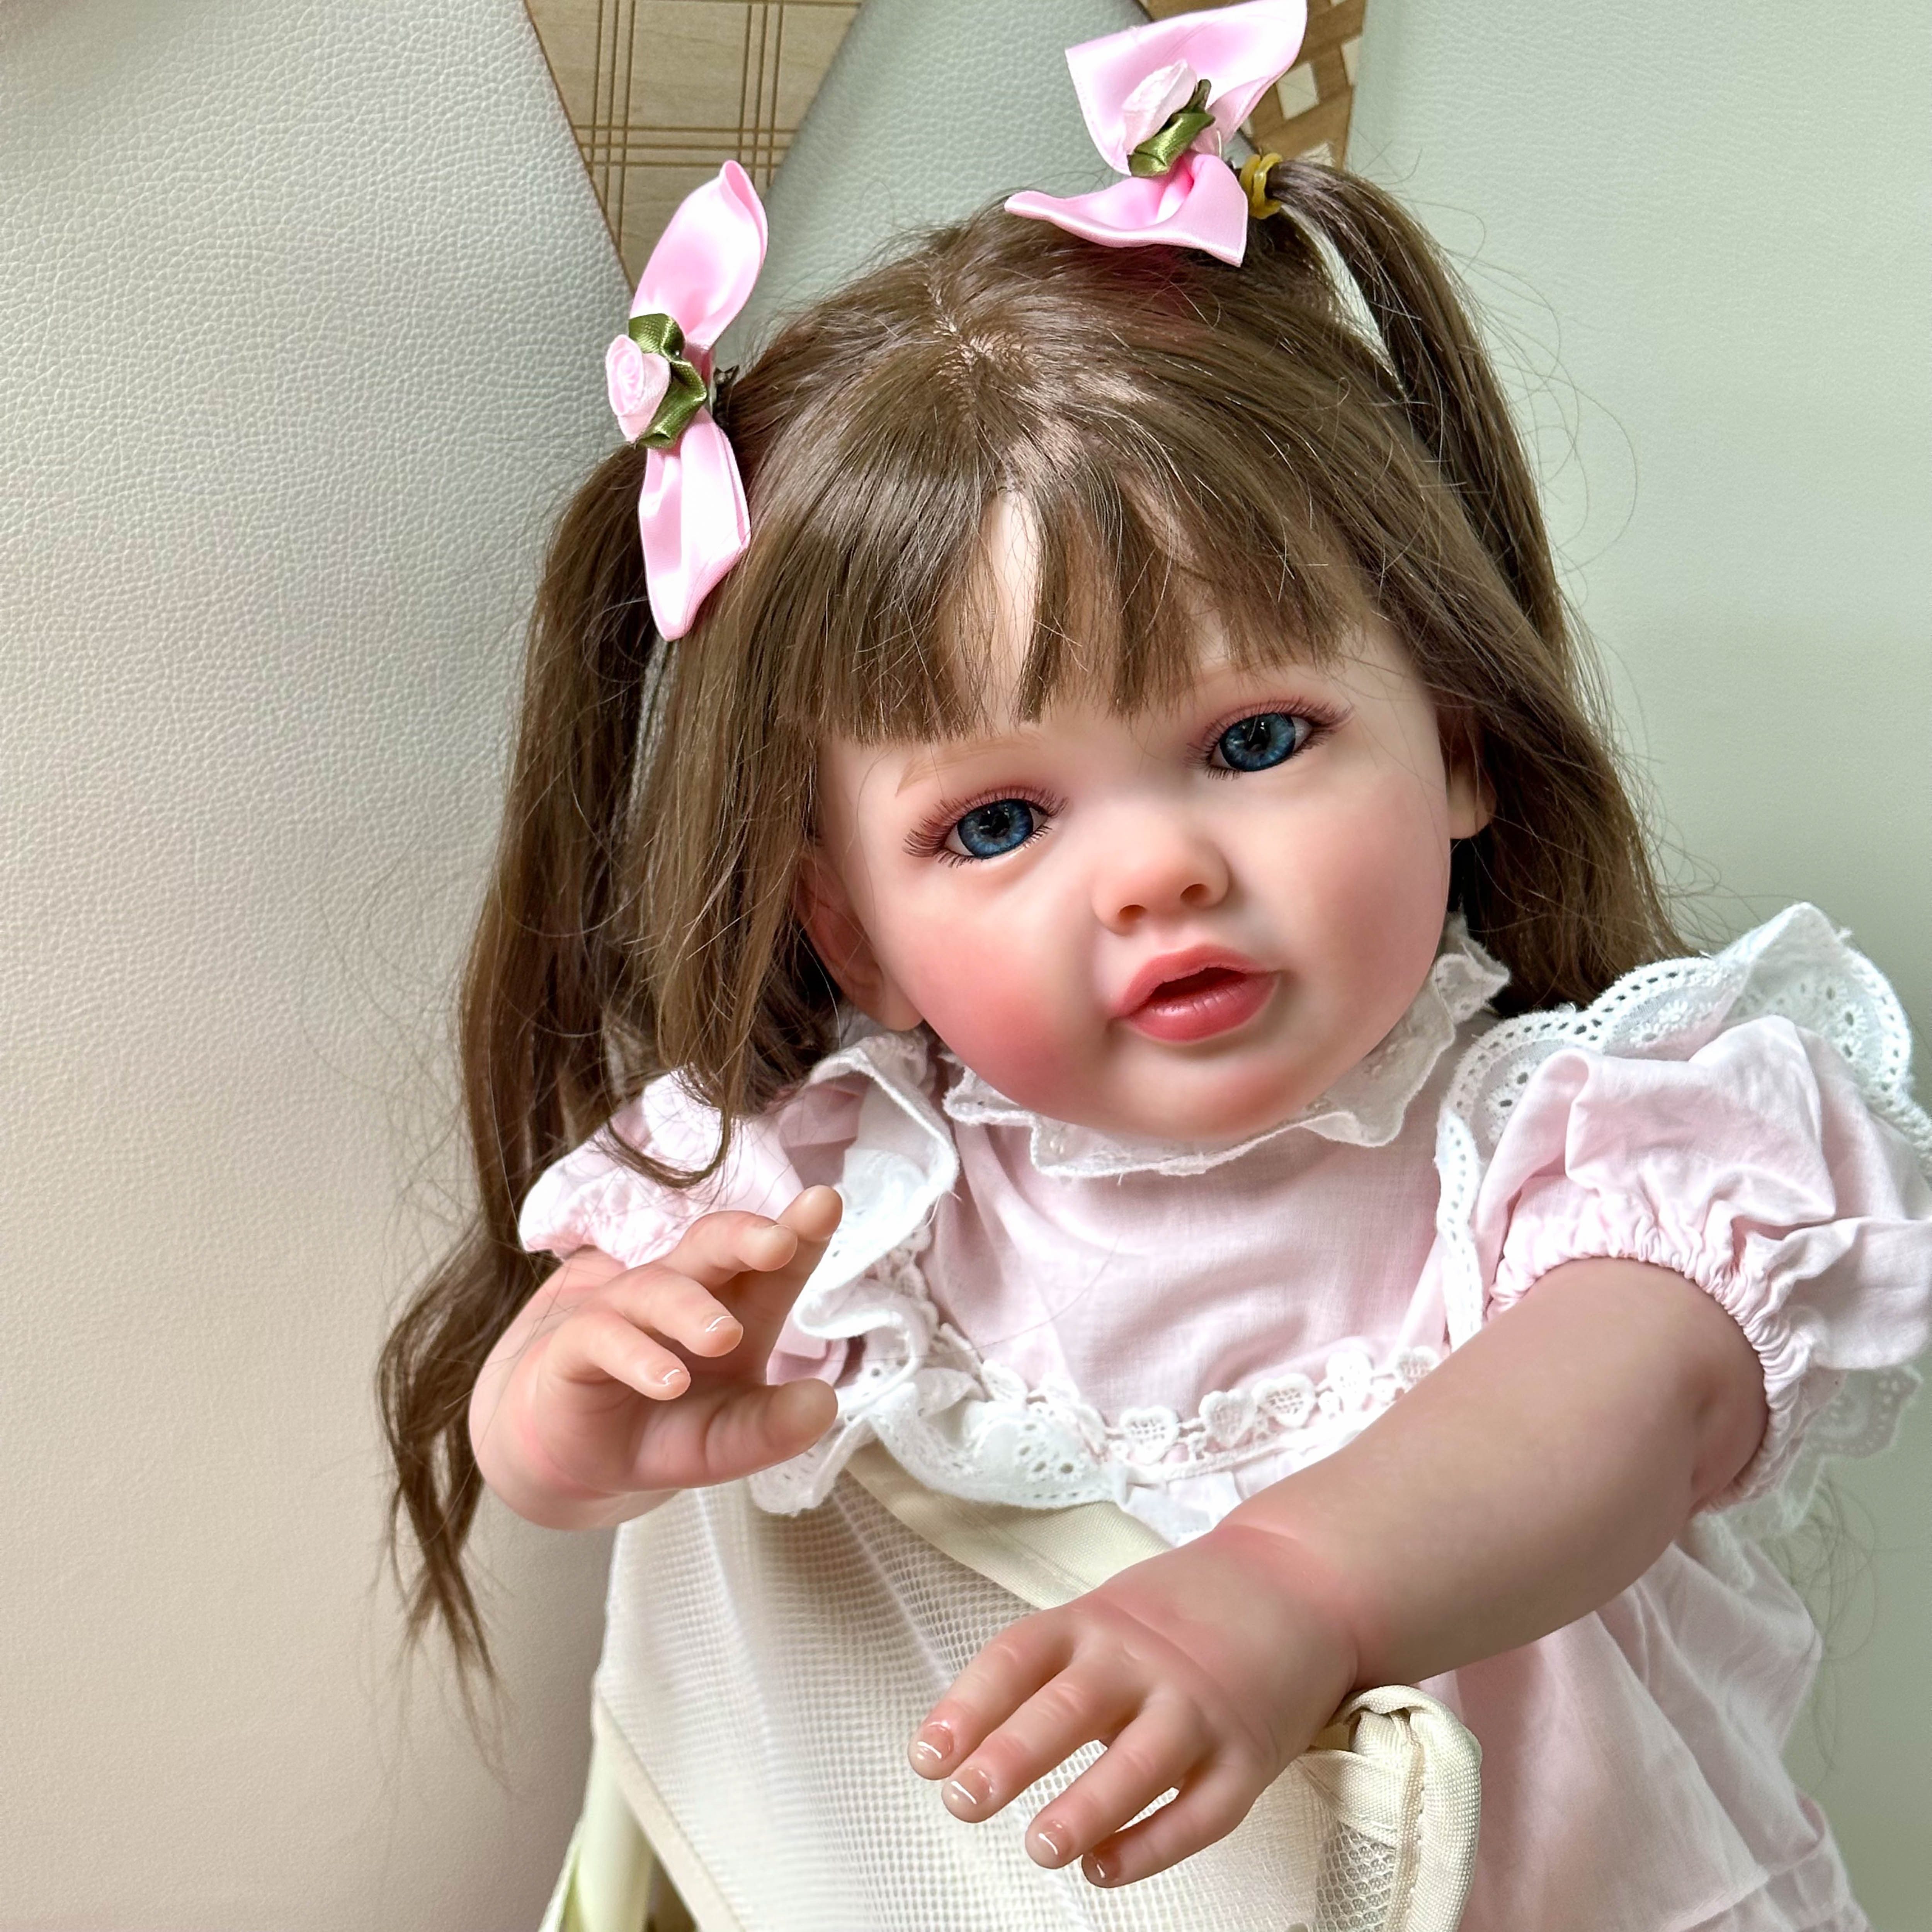  Pinky Reborn 24 Inch Reborn Baby Doll Girls,Real Life Cute  Smiling Toddler Baby Dolls,Soft Silicone Girls Babies Doll Toy Accessories  Gift for Collection & Kids Age 3+…… : Toys & Games